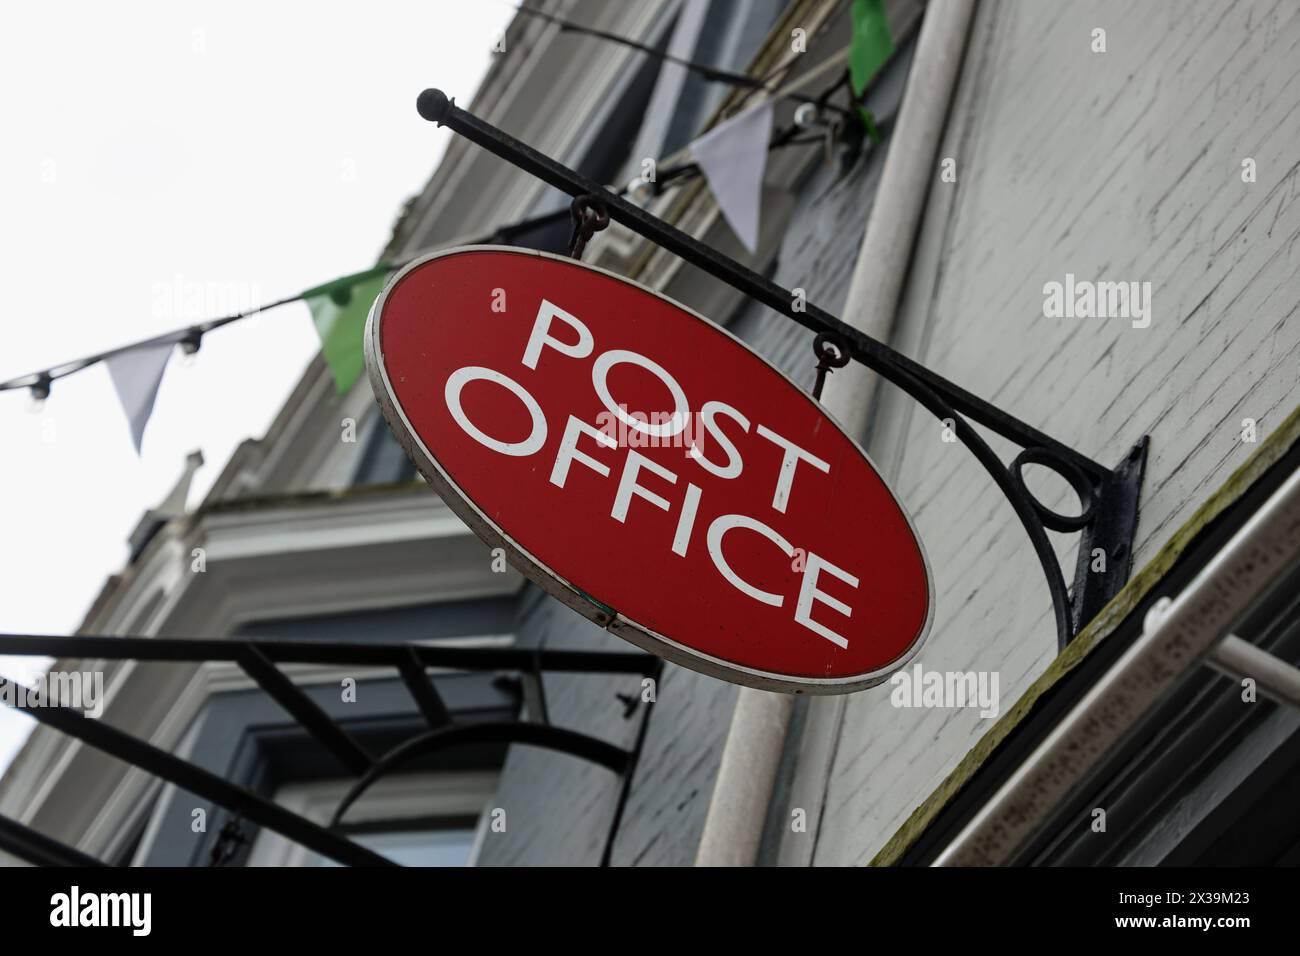 Oval Post Office hanging sign in Southside Street, Plymouth. Generic image. Stock Photo